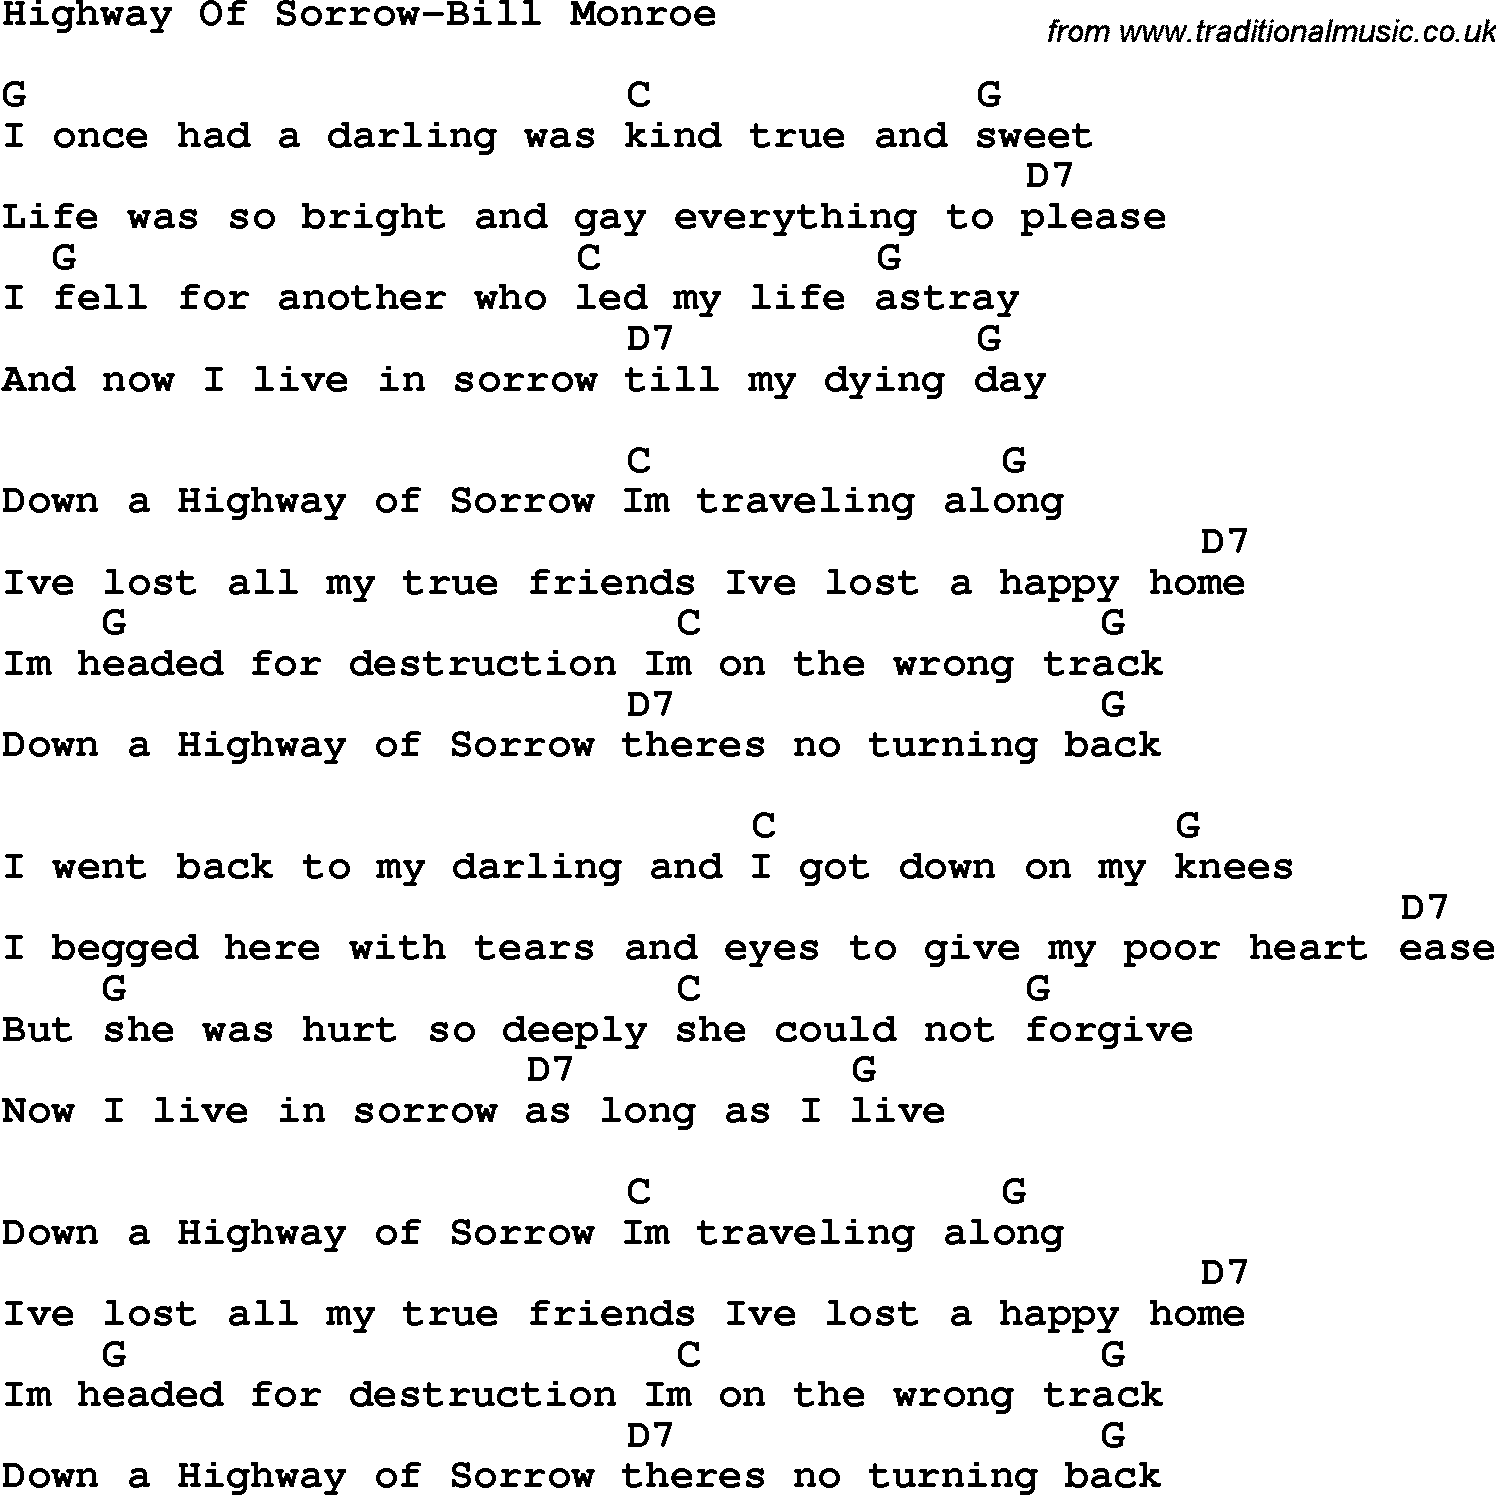 Country, Southern and Bluegrass Gospel Song Highway Of Sorrow-Bill Monroe lyrics and chords